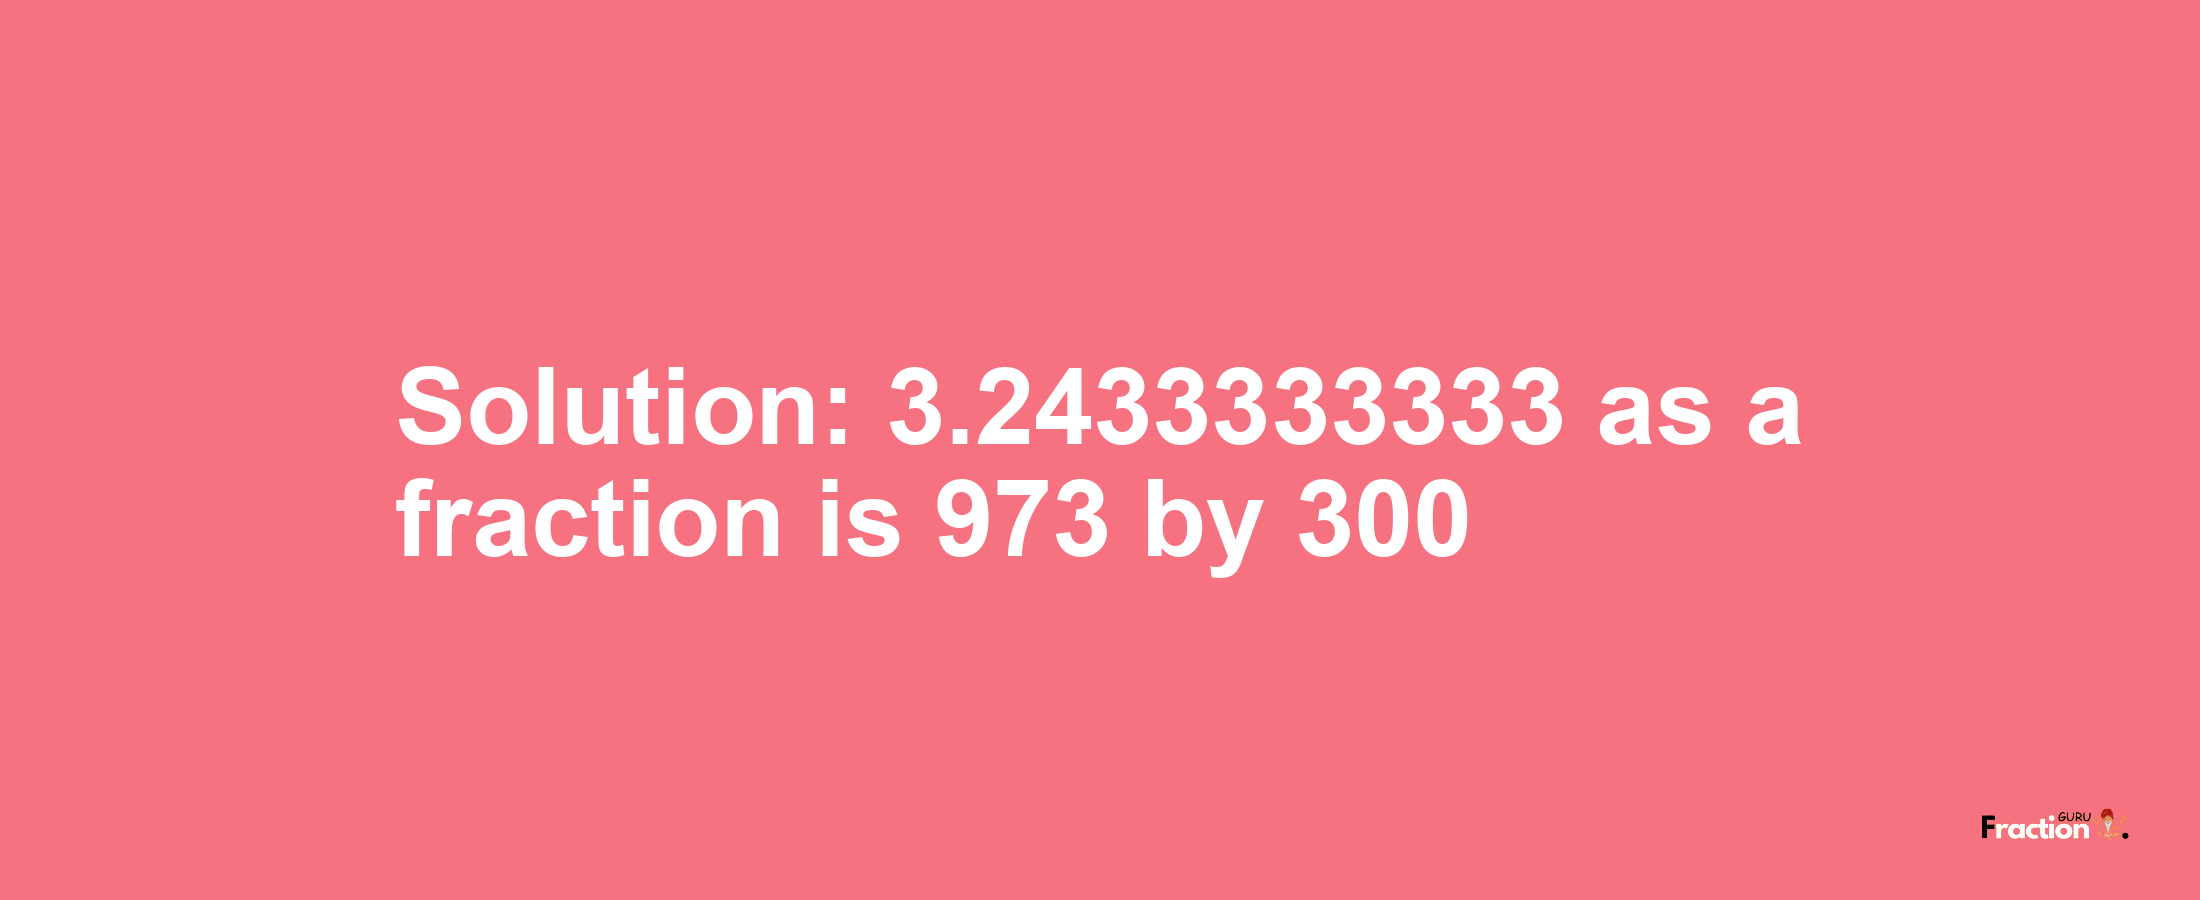 Solution:3.2433333333 as a fraction is 973/300